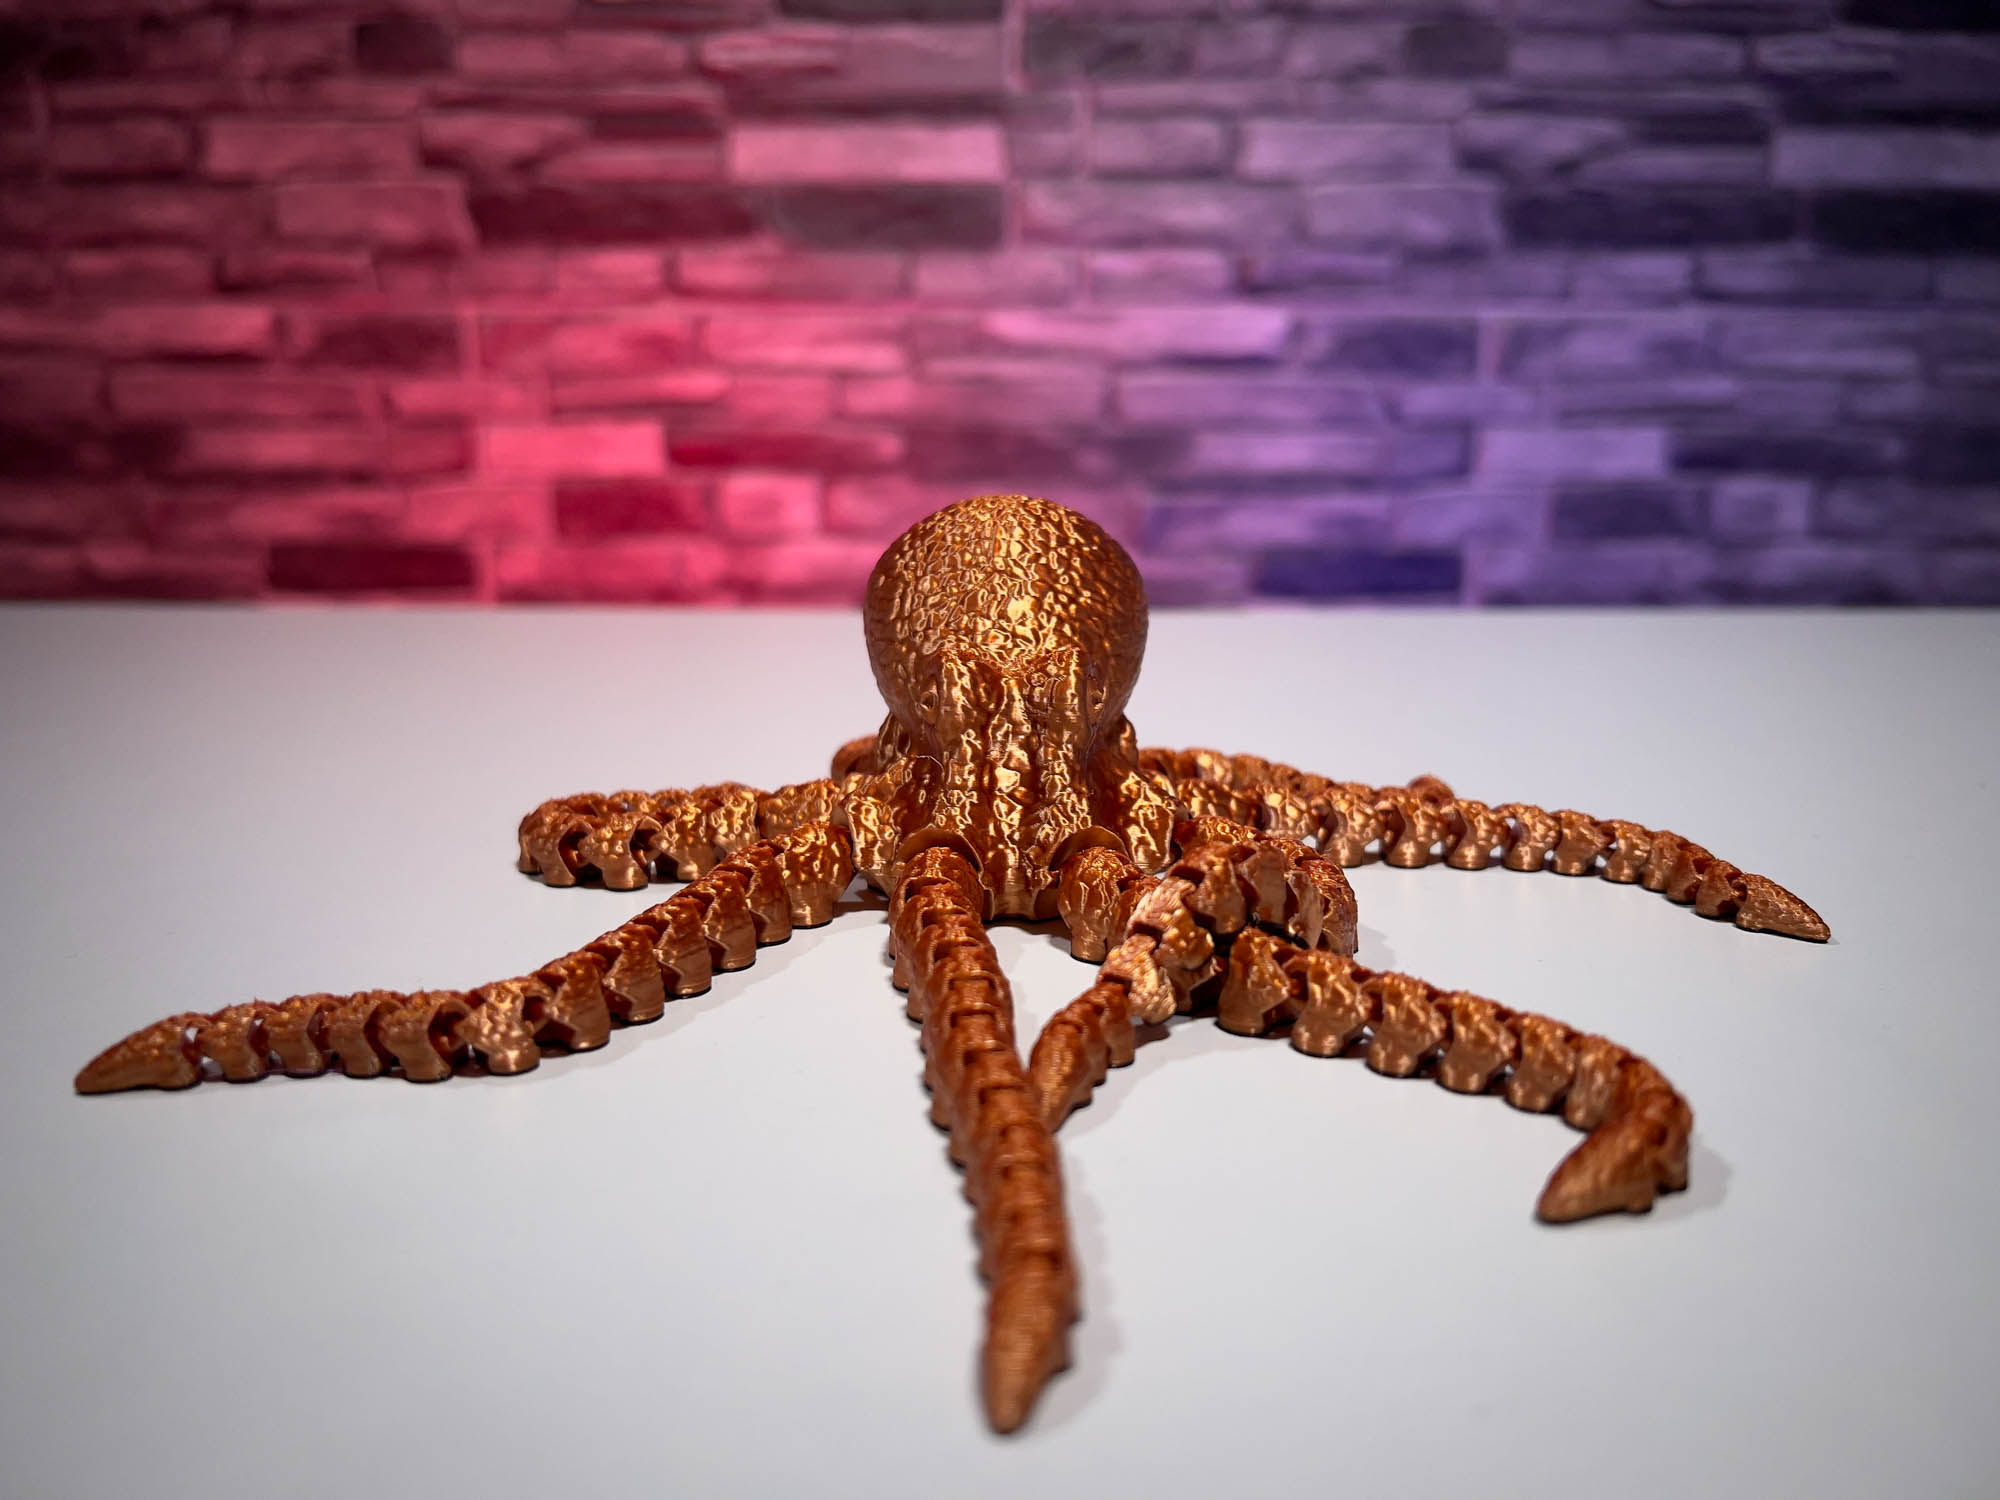 3D Printed Articulated Octopus 2.0